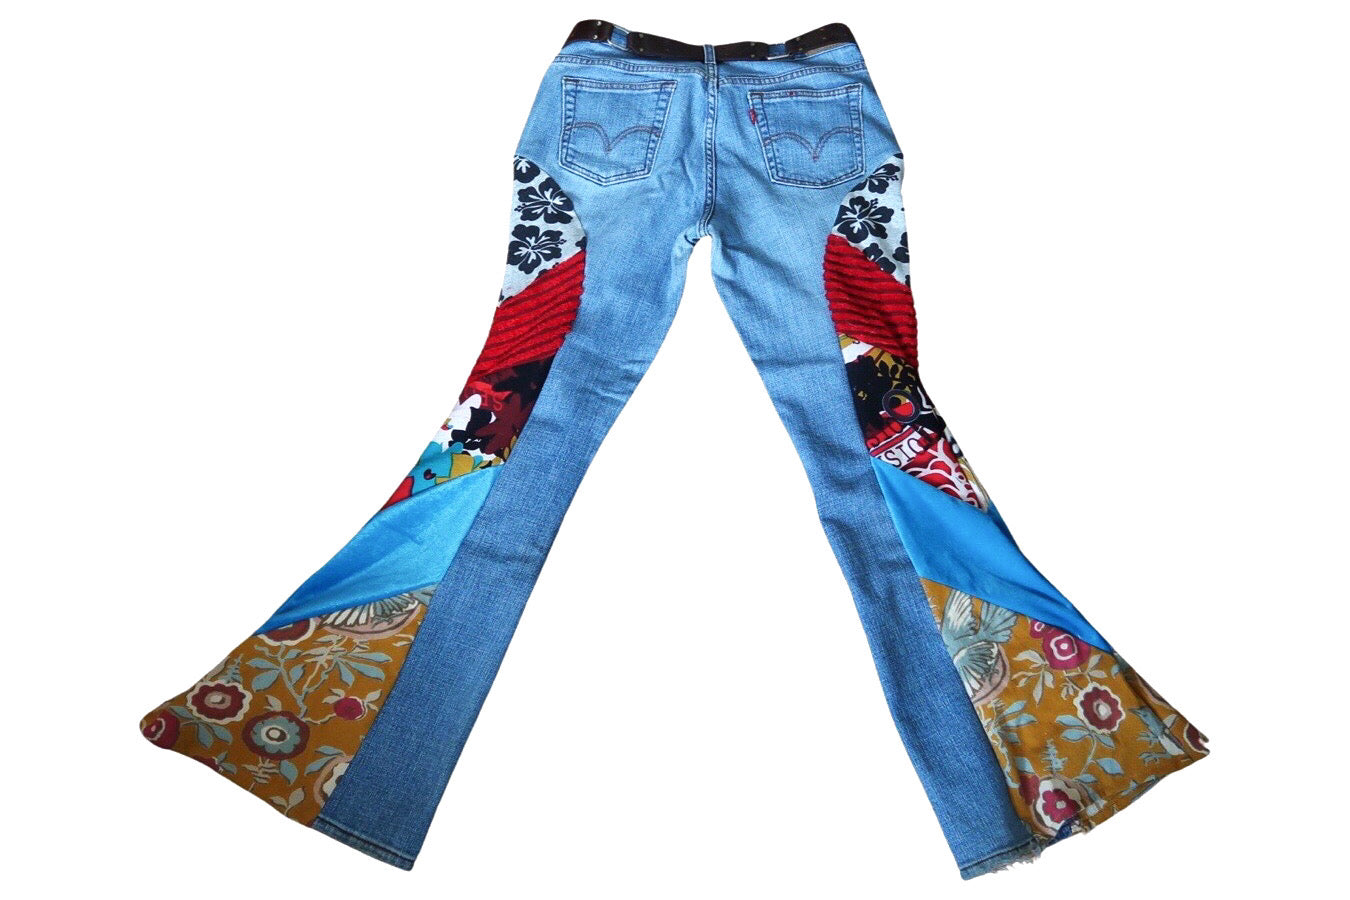 Reworked Levi's Bell Bottom Blue Jeans